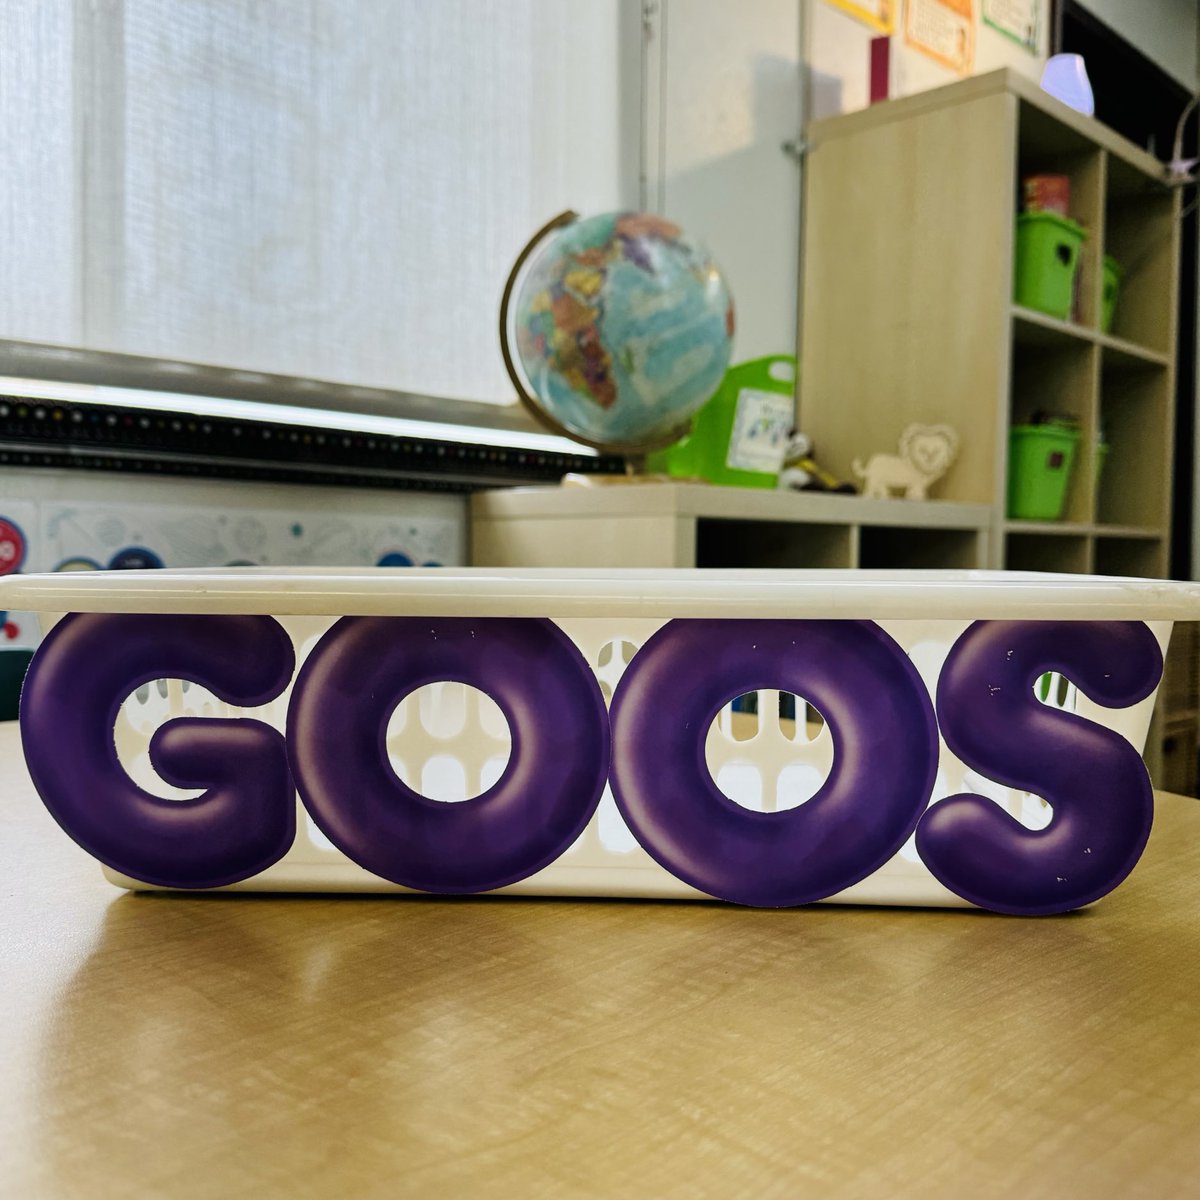 Happy #GOOSPaperDay ♻️ Our GOOS paper bin is one of the most used items in our classroom! ⁦@EcoSchoolsCAN⁩ ⁦@StAnneECO1⁩ ⁦@StAnneOCSB⁩ ⁦@ocsbEco⁩ #EcoSchool #Reuse #GOOS #GoodOnOneSise #ocsbEco